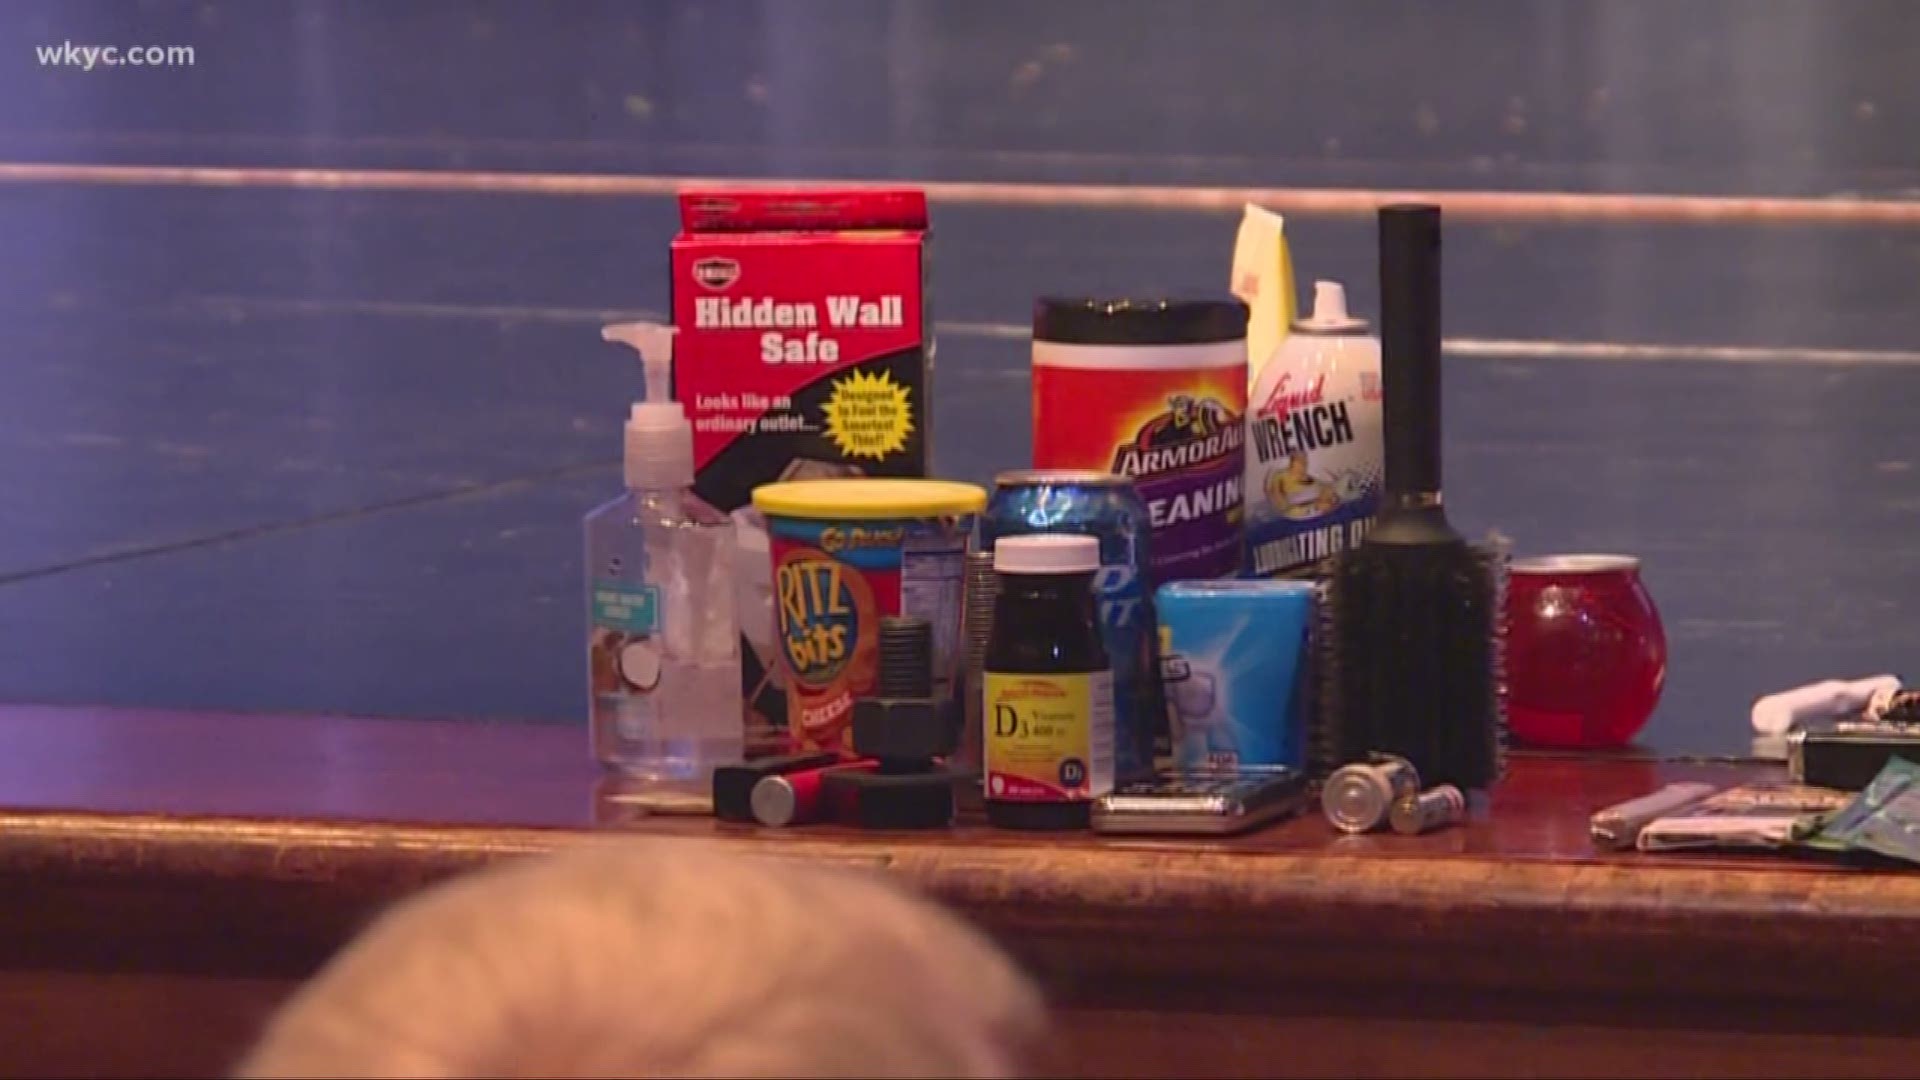 Teens find new ways to hide drugs in plain sight